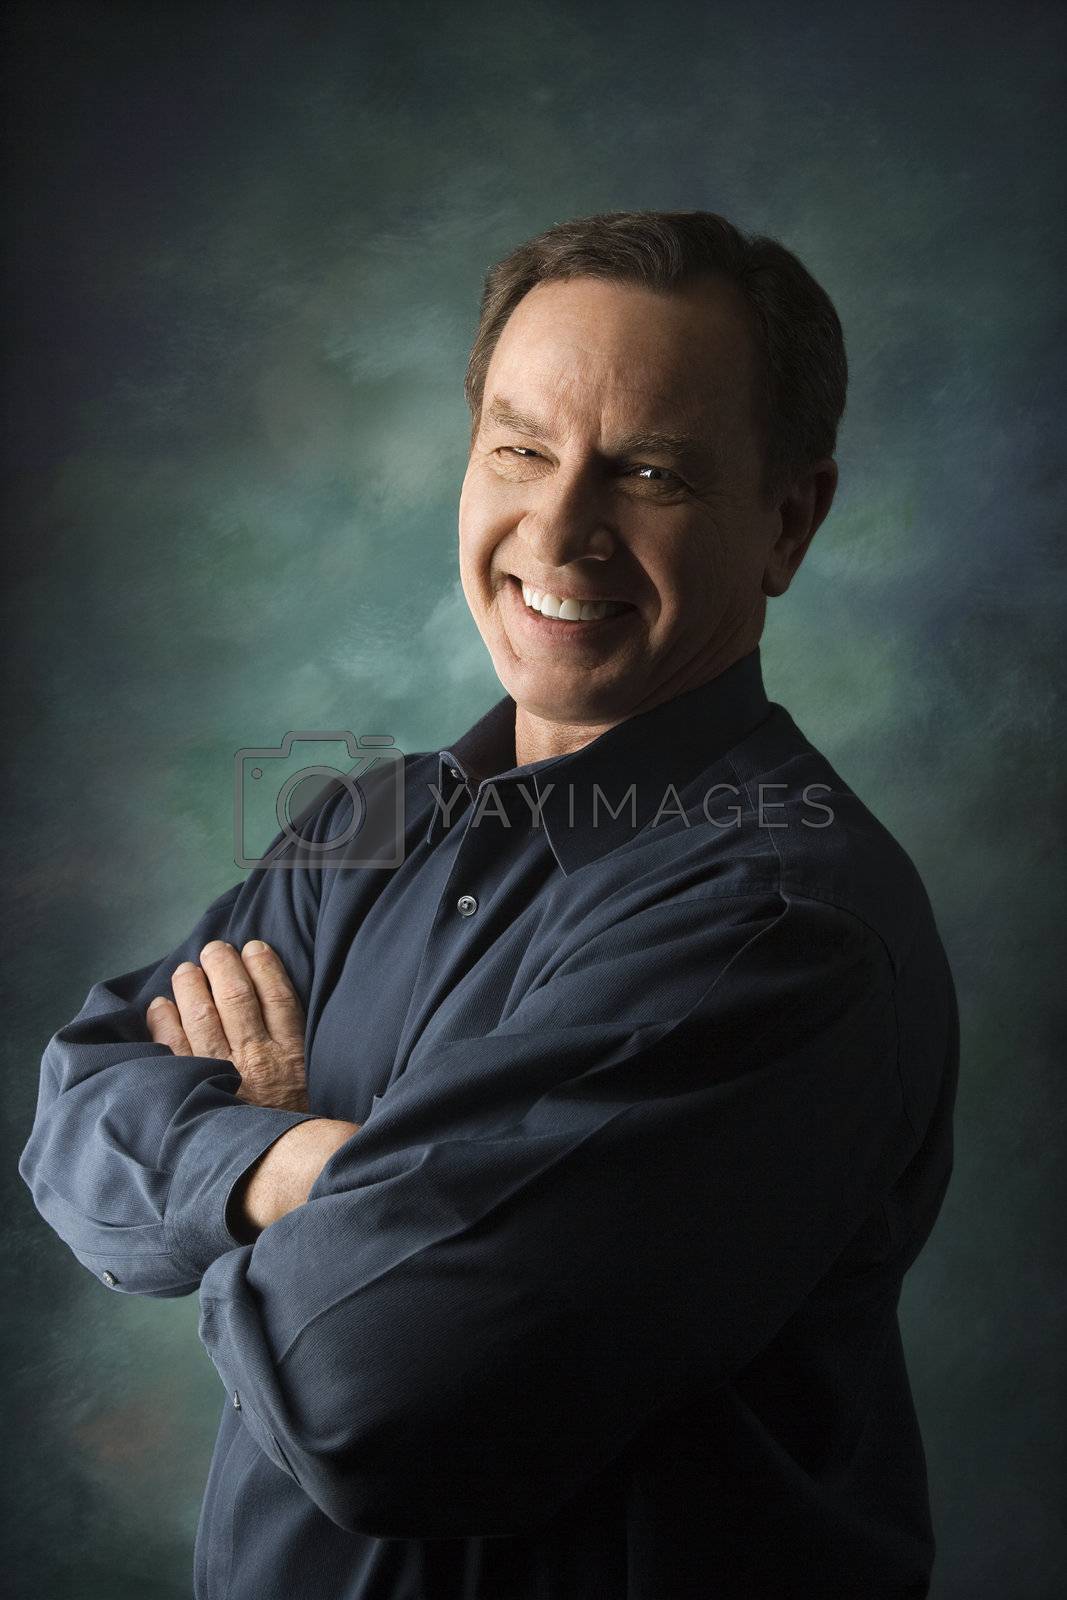 Royalty free image of Smiling man portrait. by iofoto